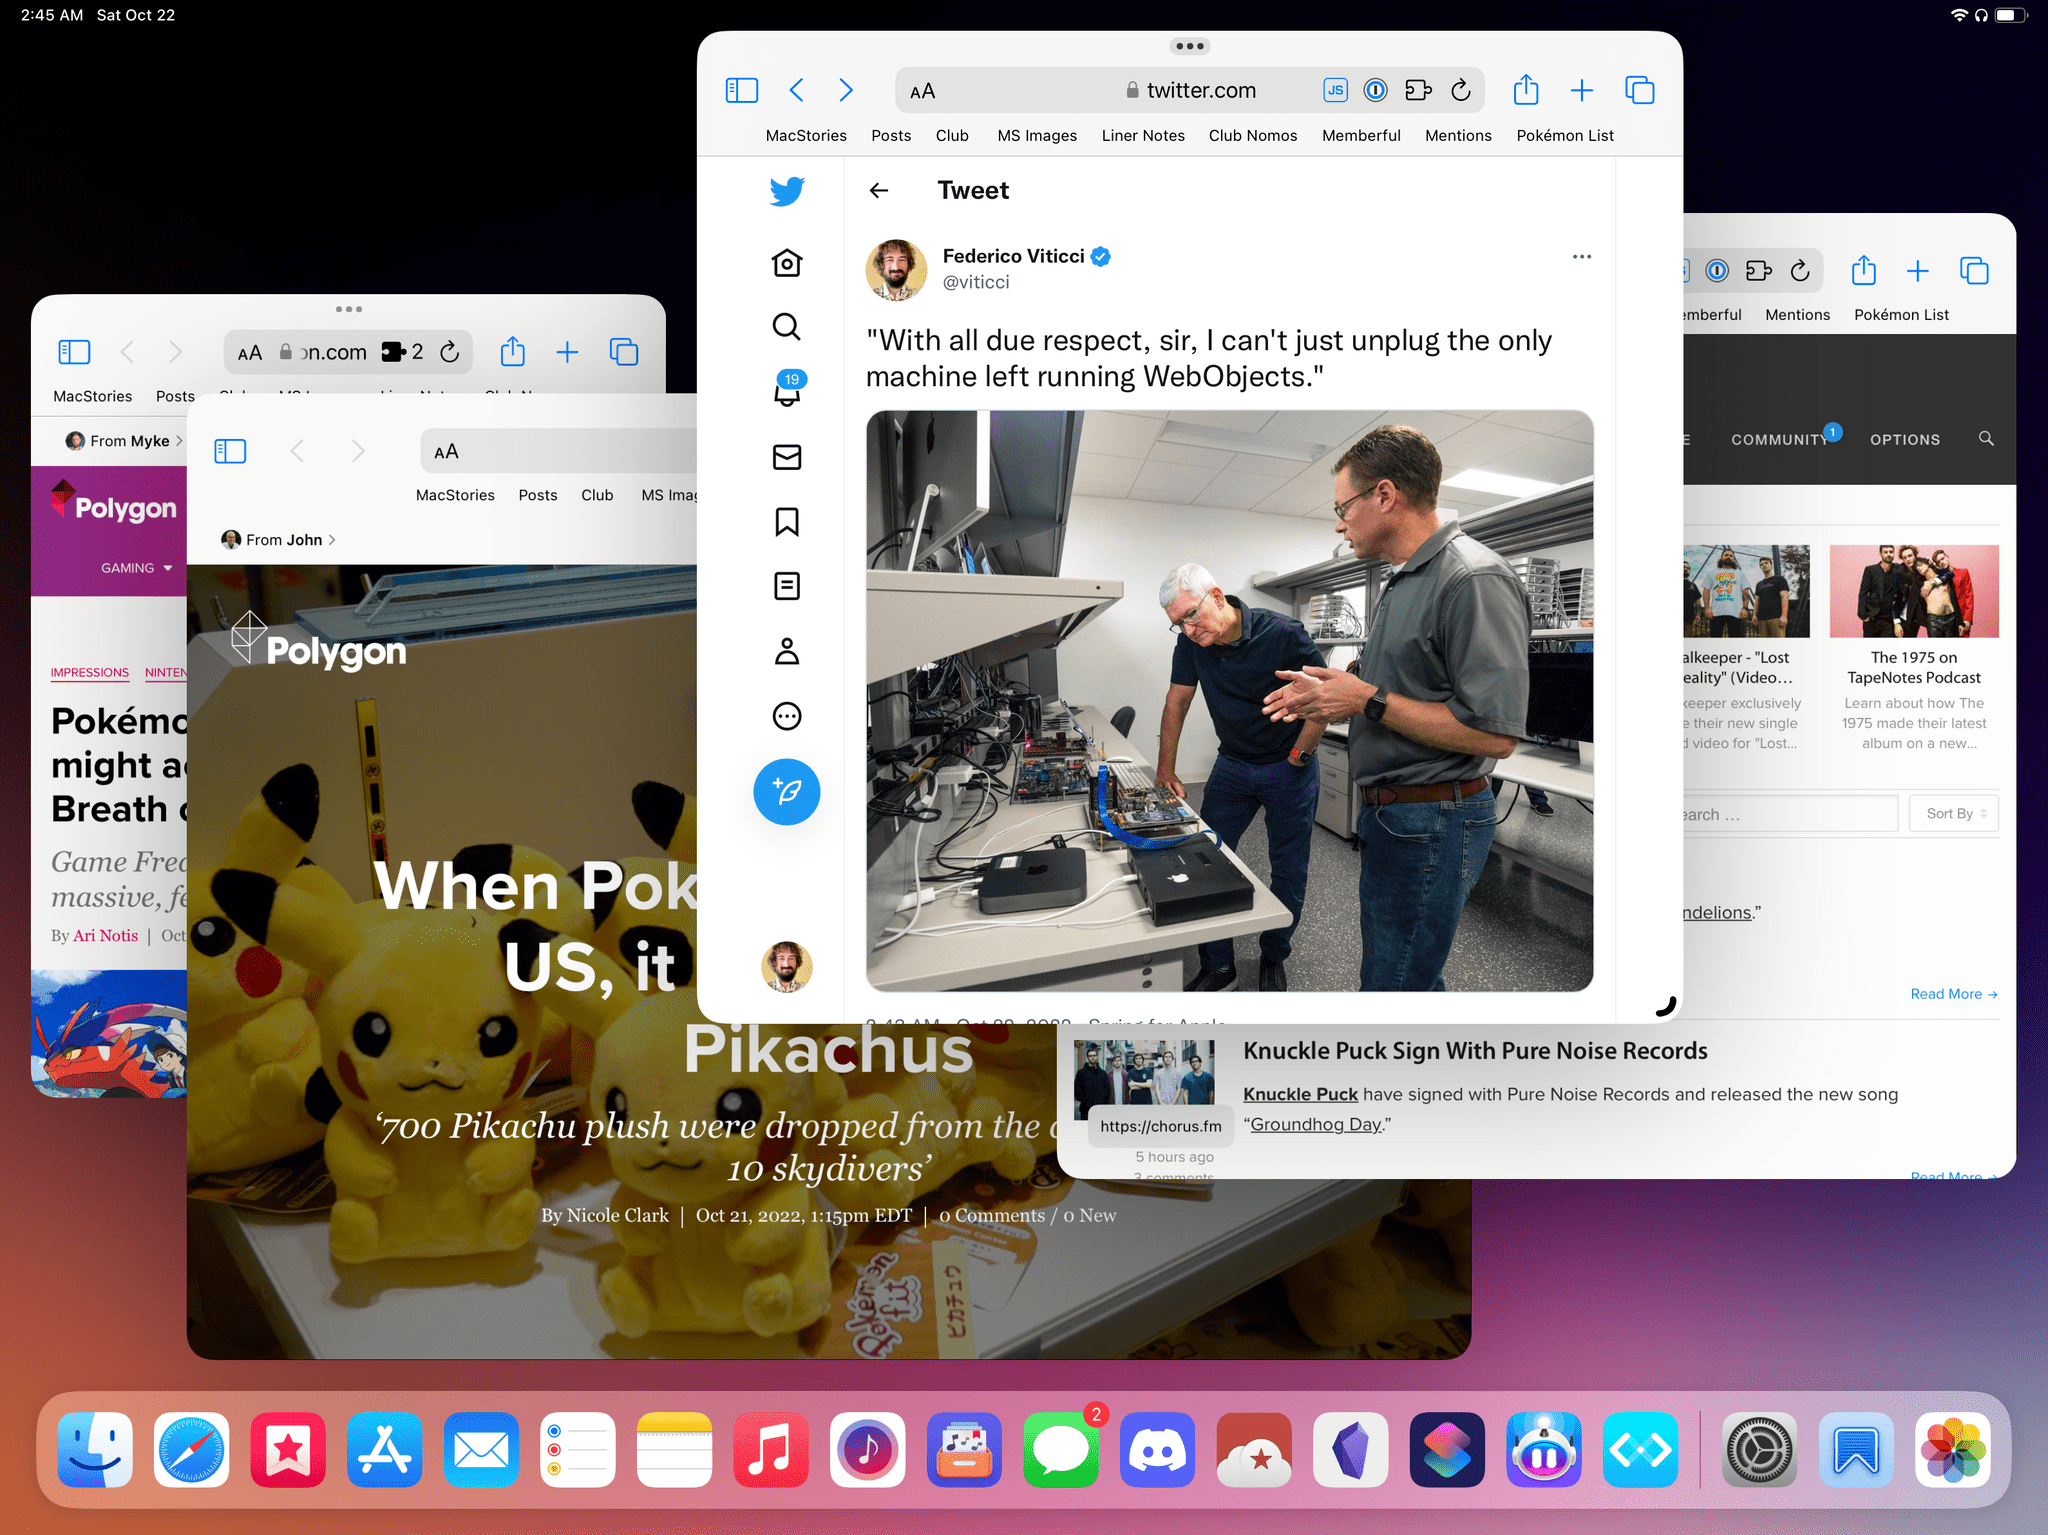 Stage Manager's limitation is four windows in a workspace, not four different apps. In this screenshot, you can see I have four Safari windows open. Dragging in a fifth one would replace the oldest Safari window.